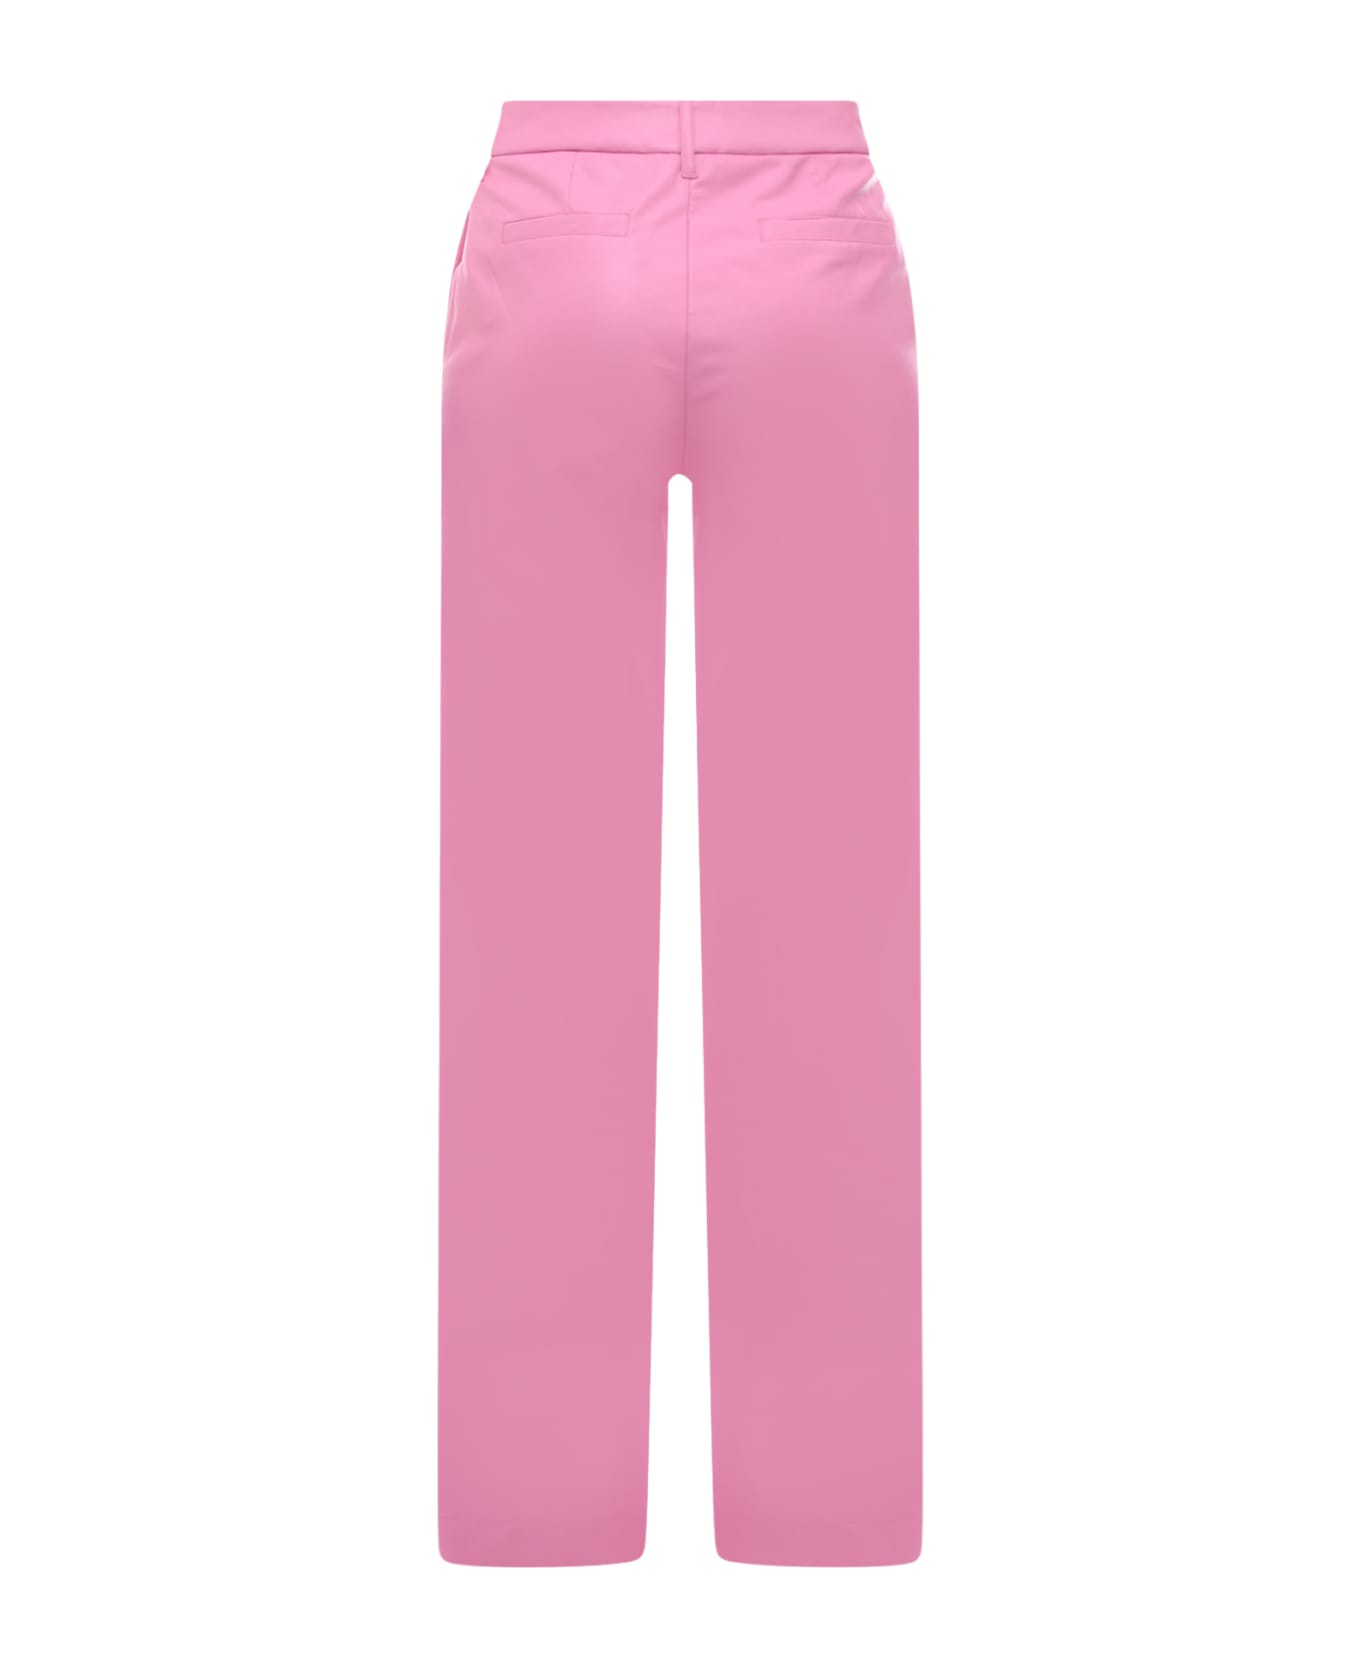 STAND STUDIO Mabel Trouser - Pink